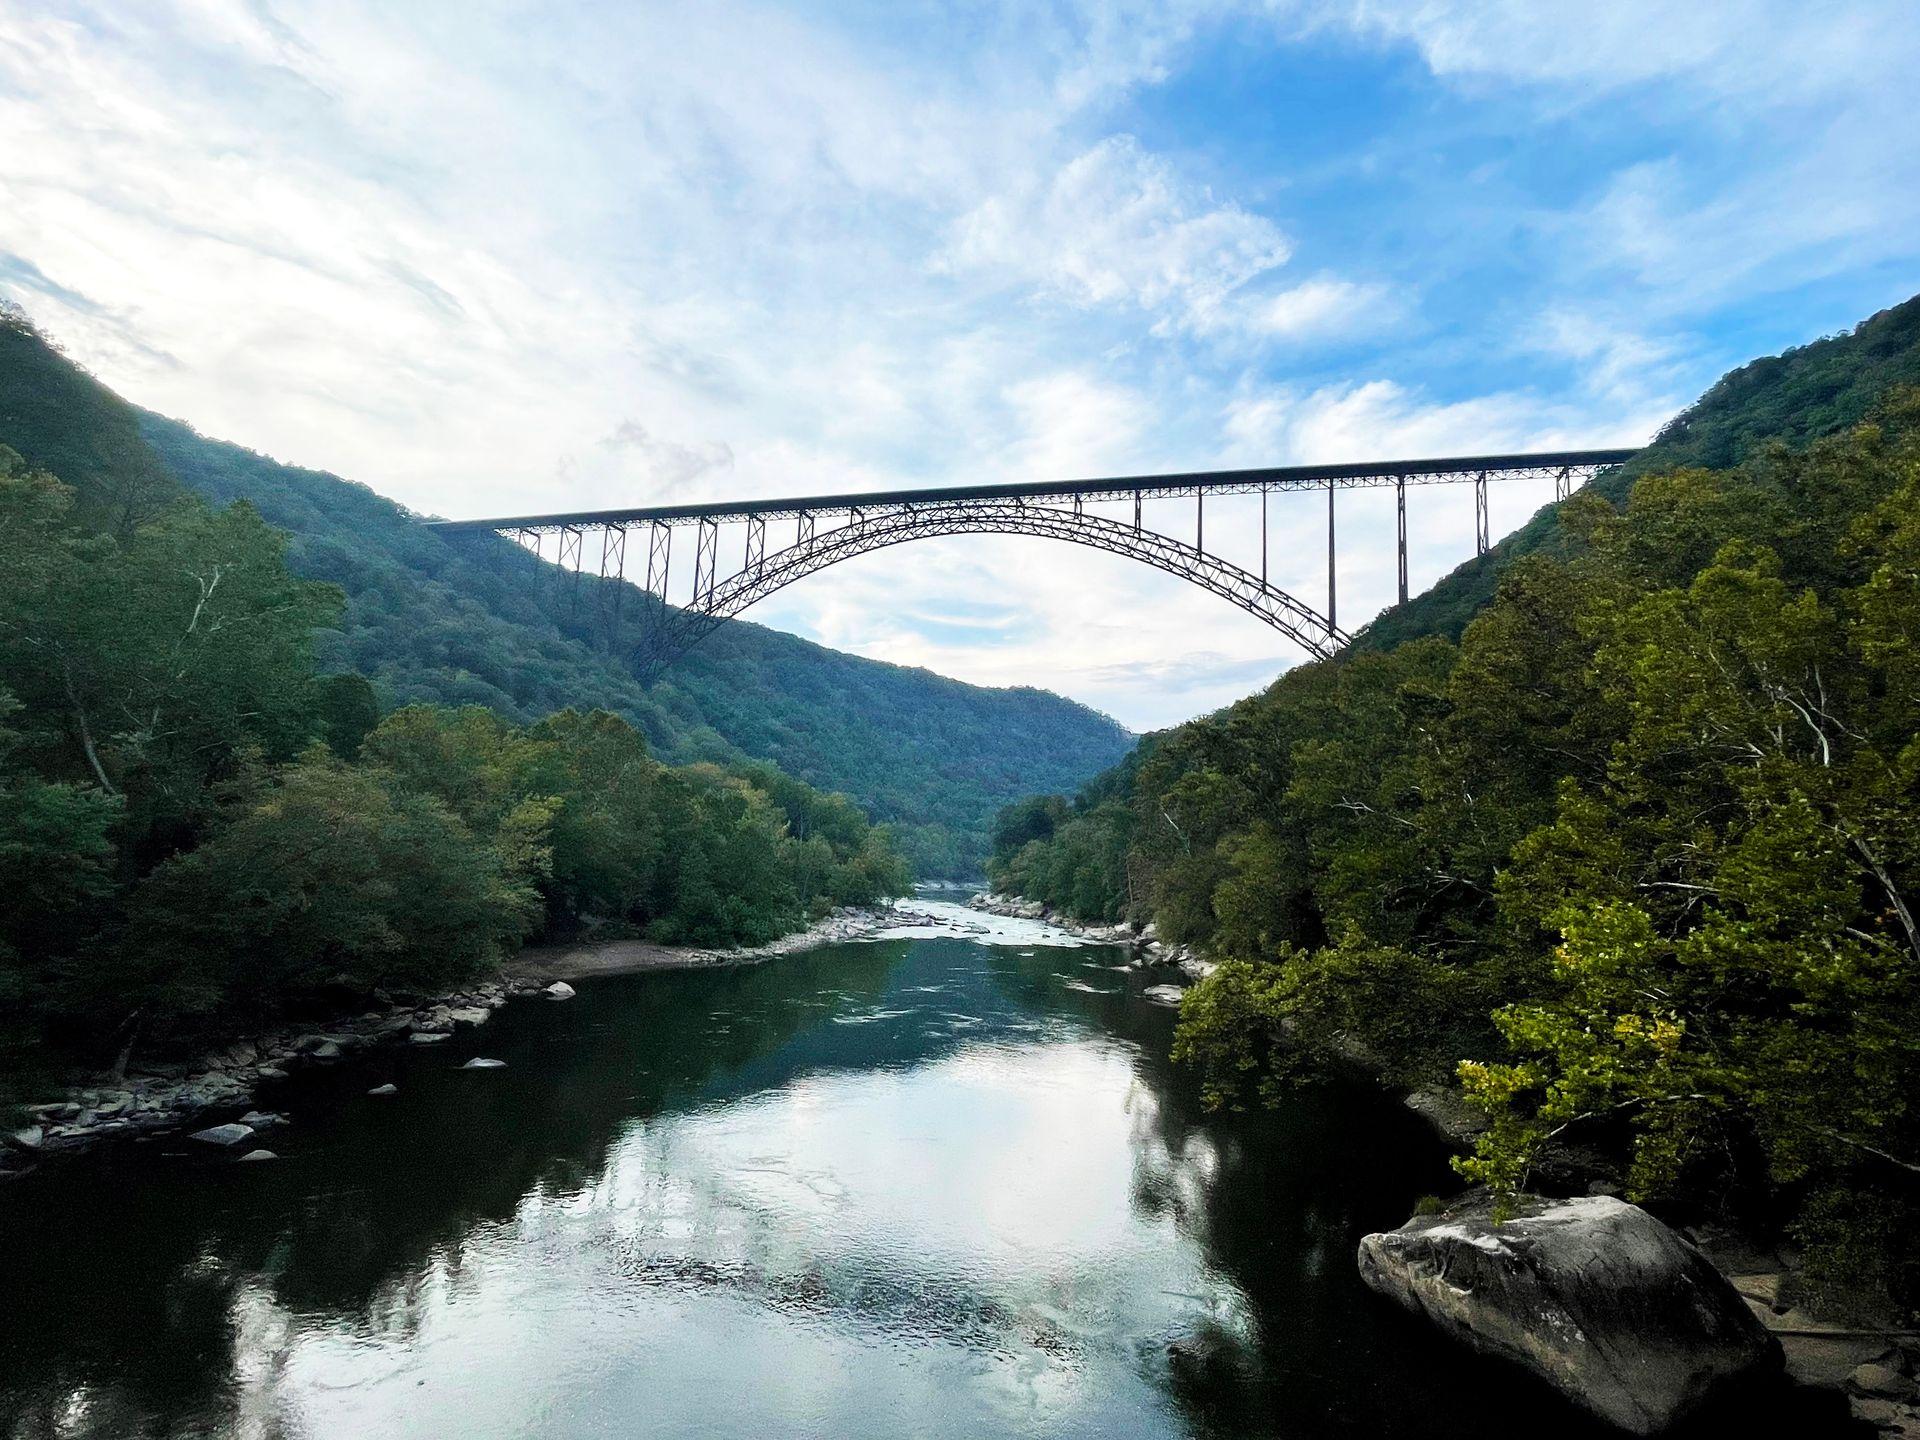 A view of the New River Gorge Bridge from below.